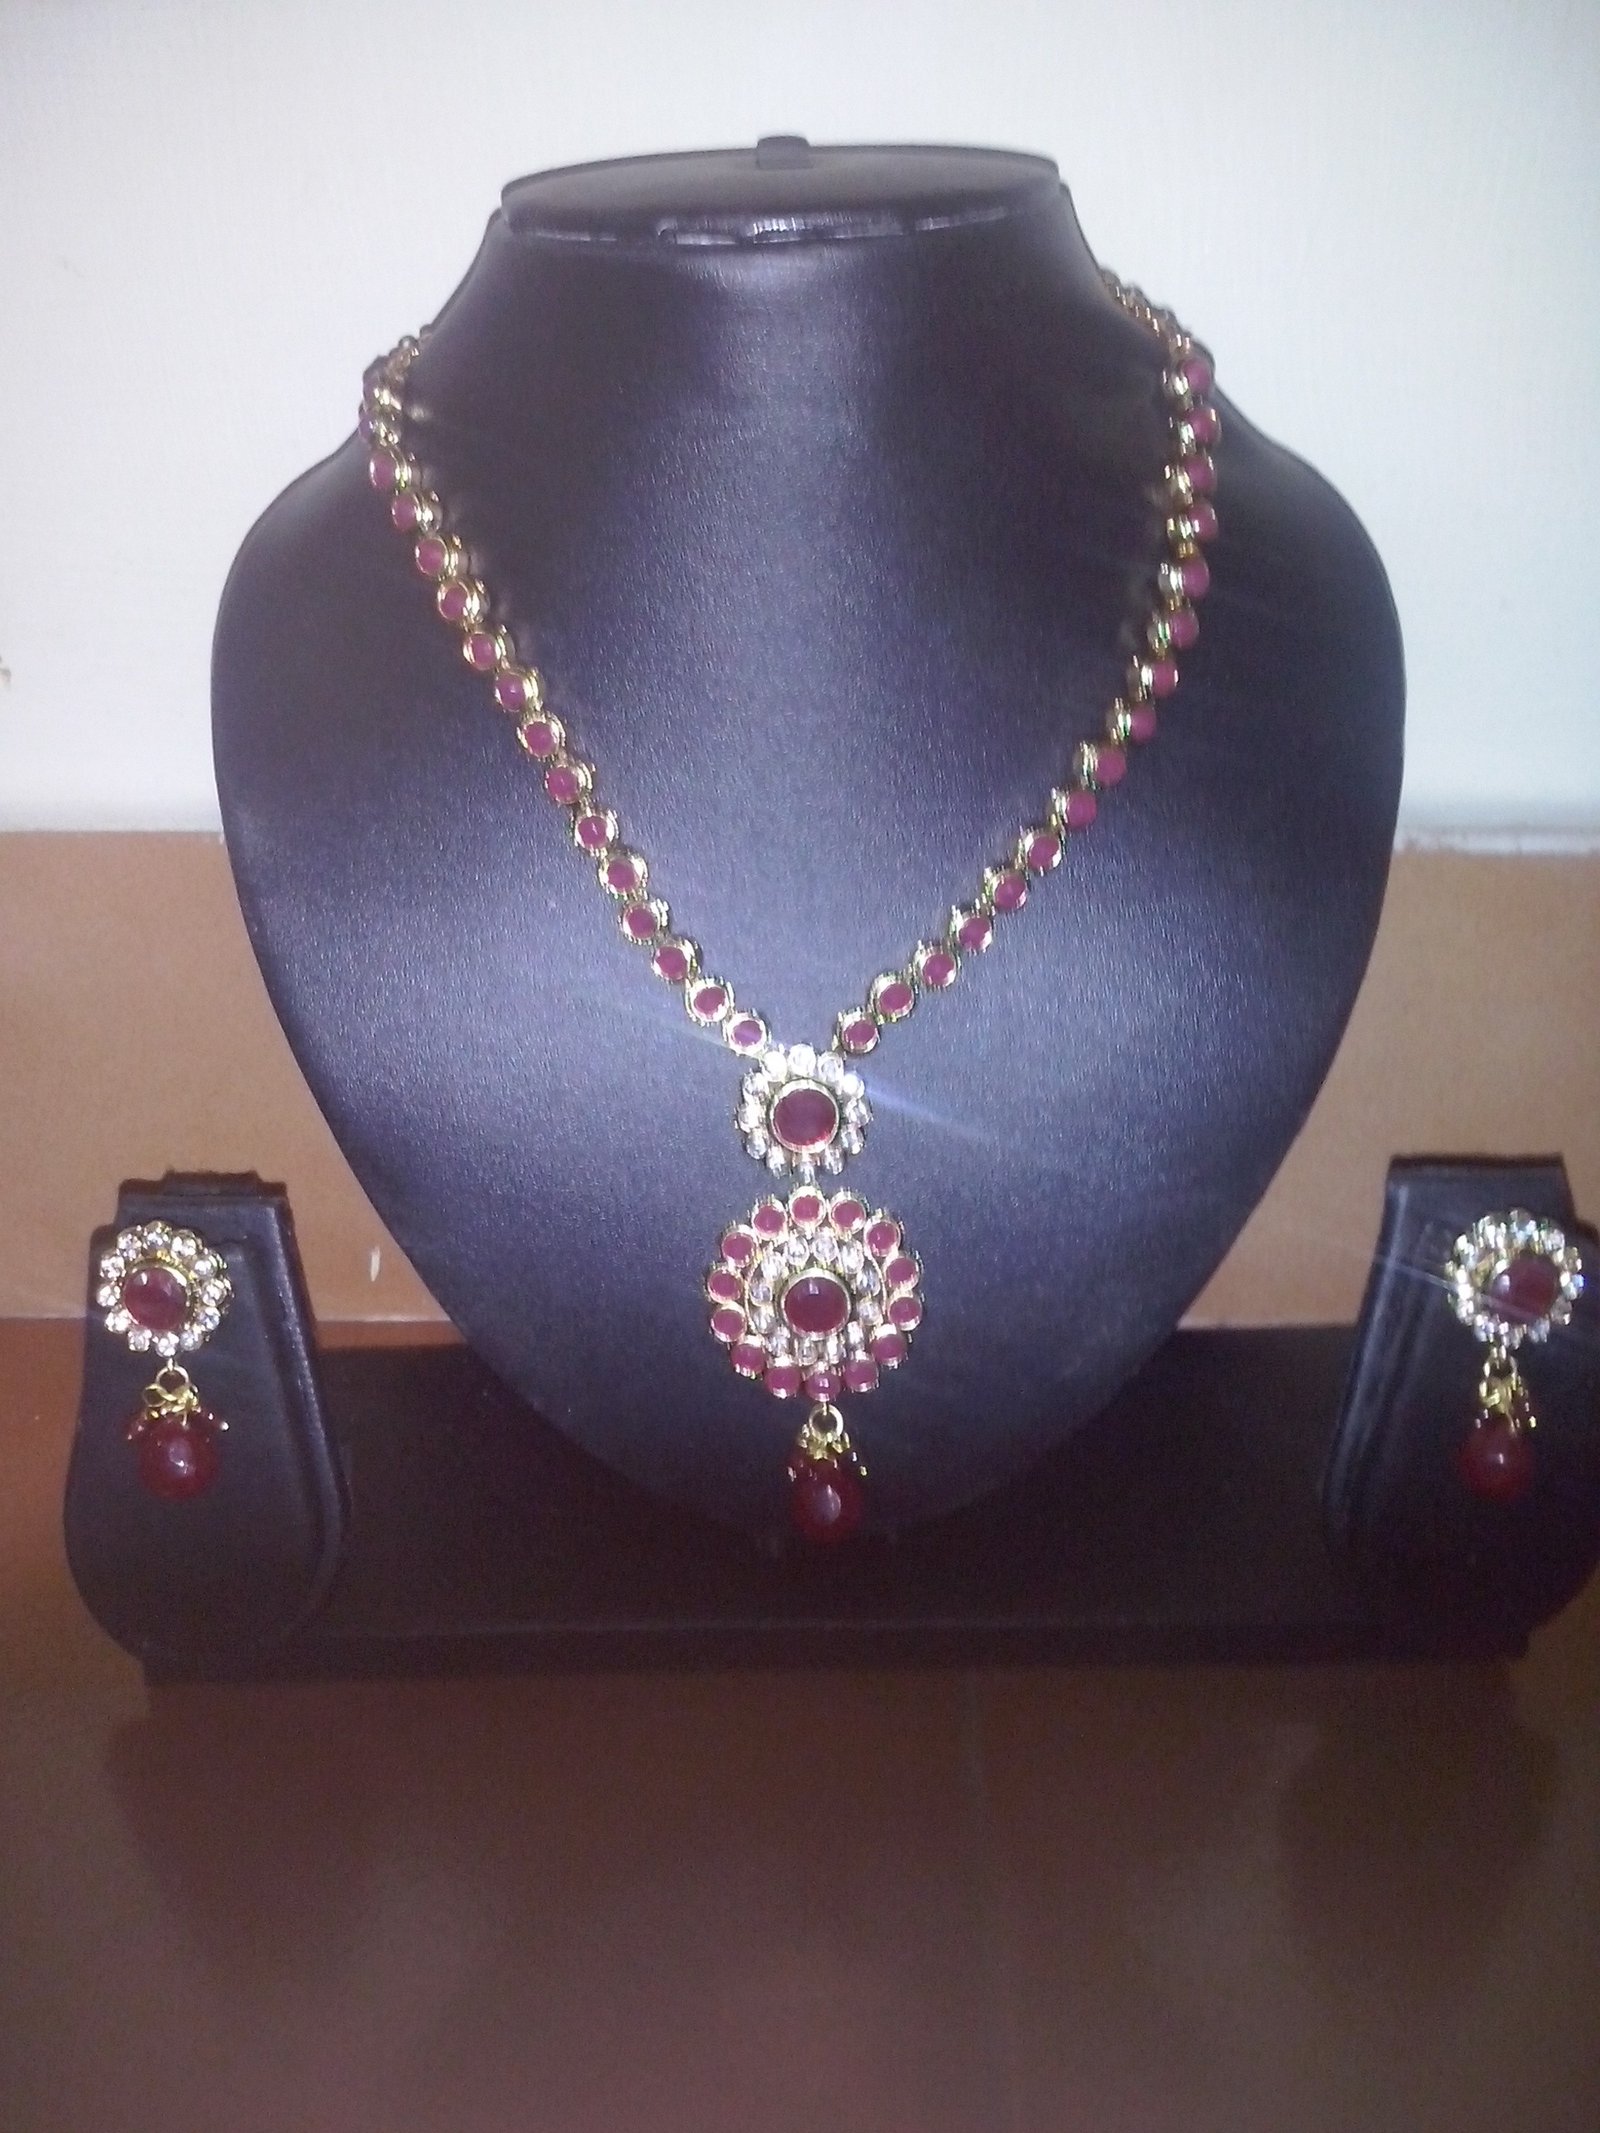 Courses of Jewelry making classes at Chennai